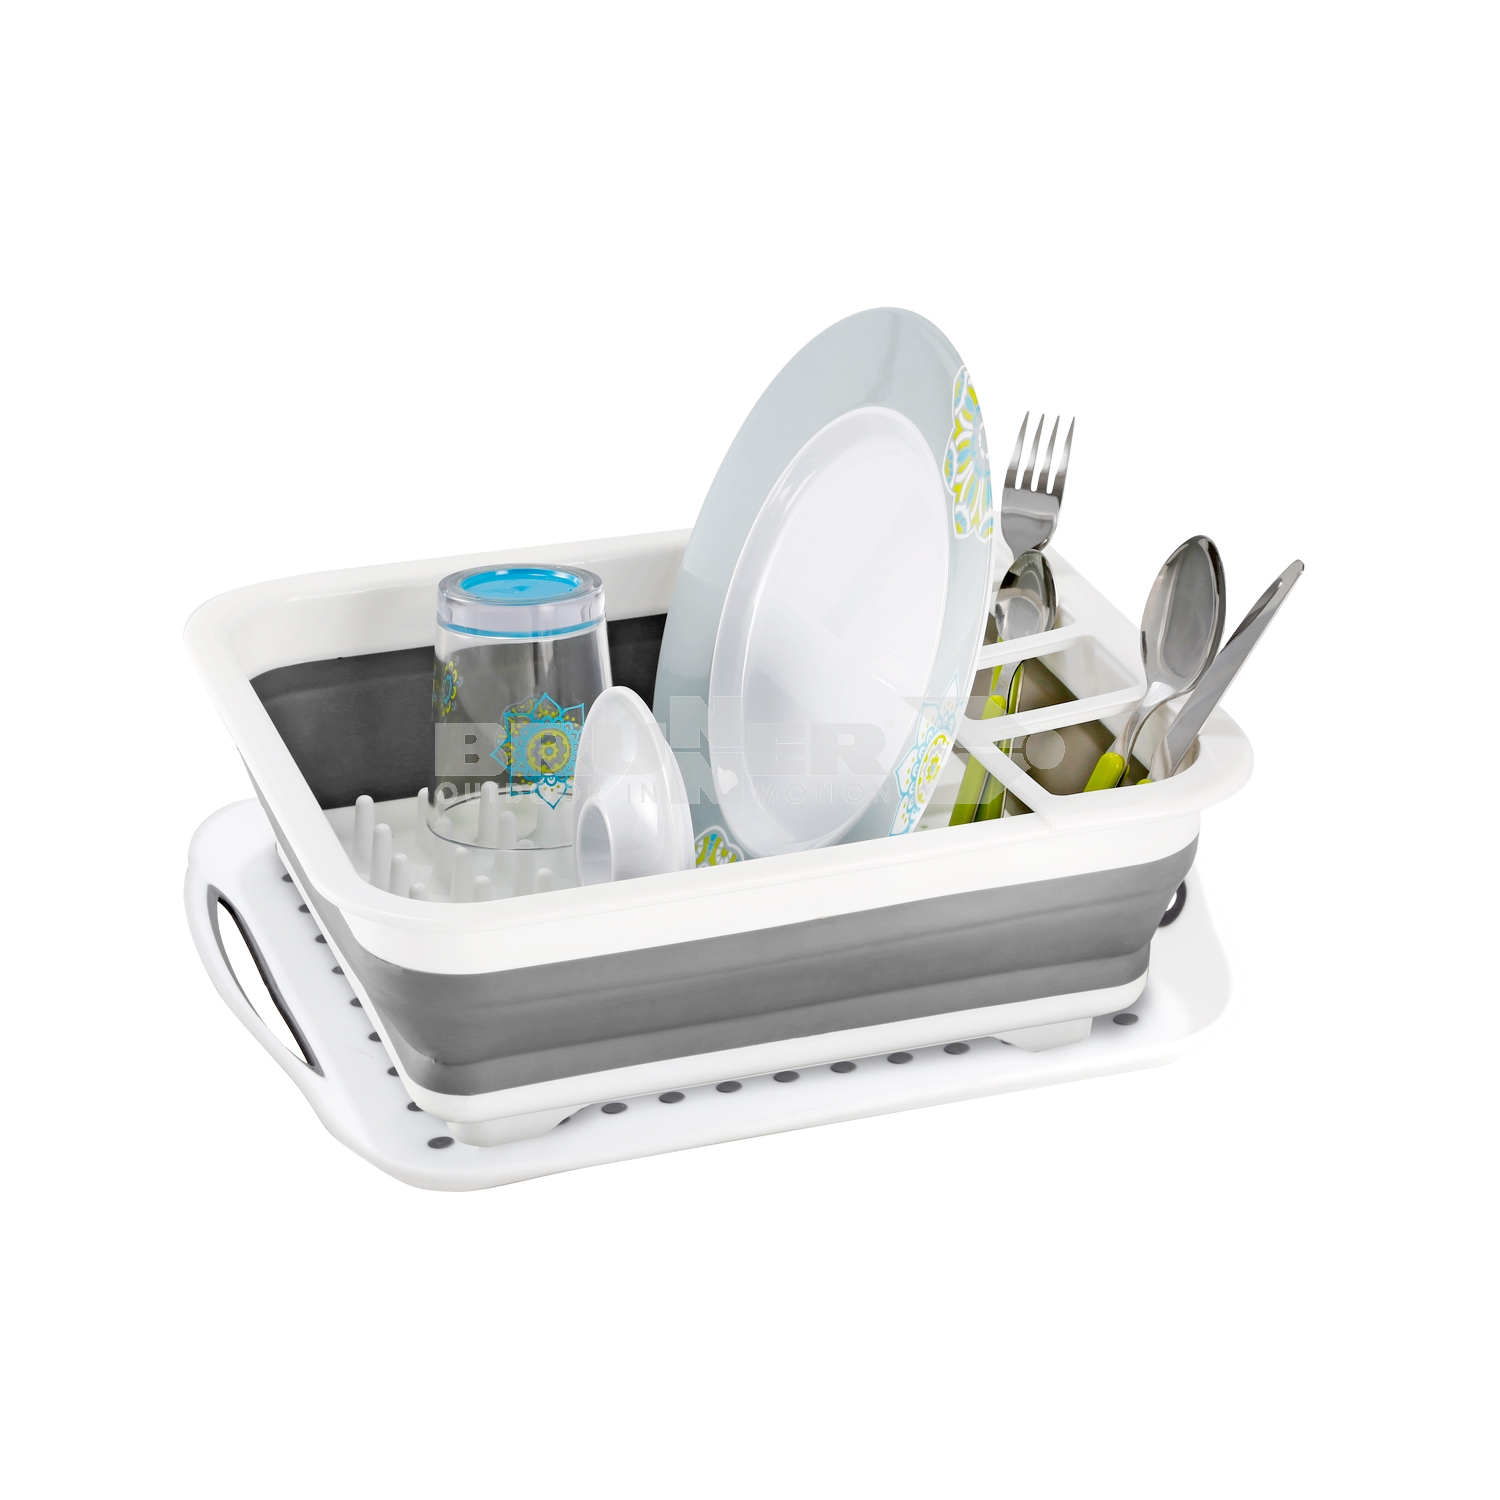 Folding Dish Rack - Dish Drainer Folds Away When Not in Use